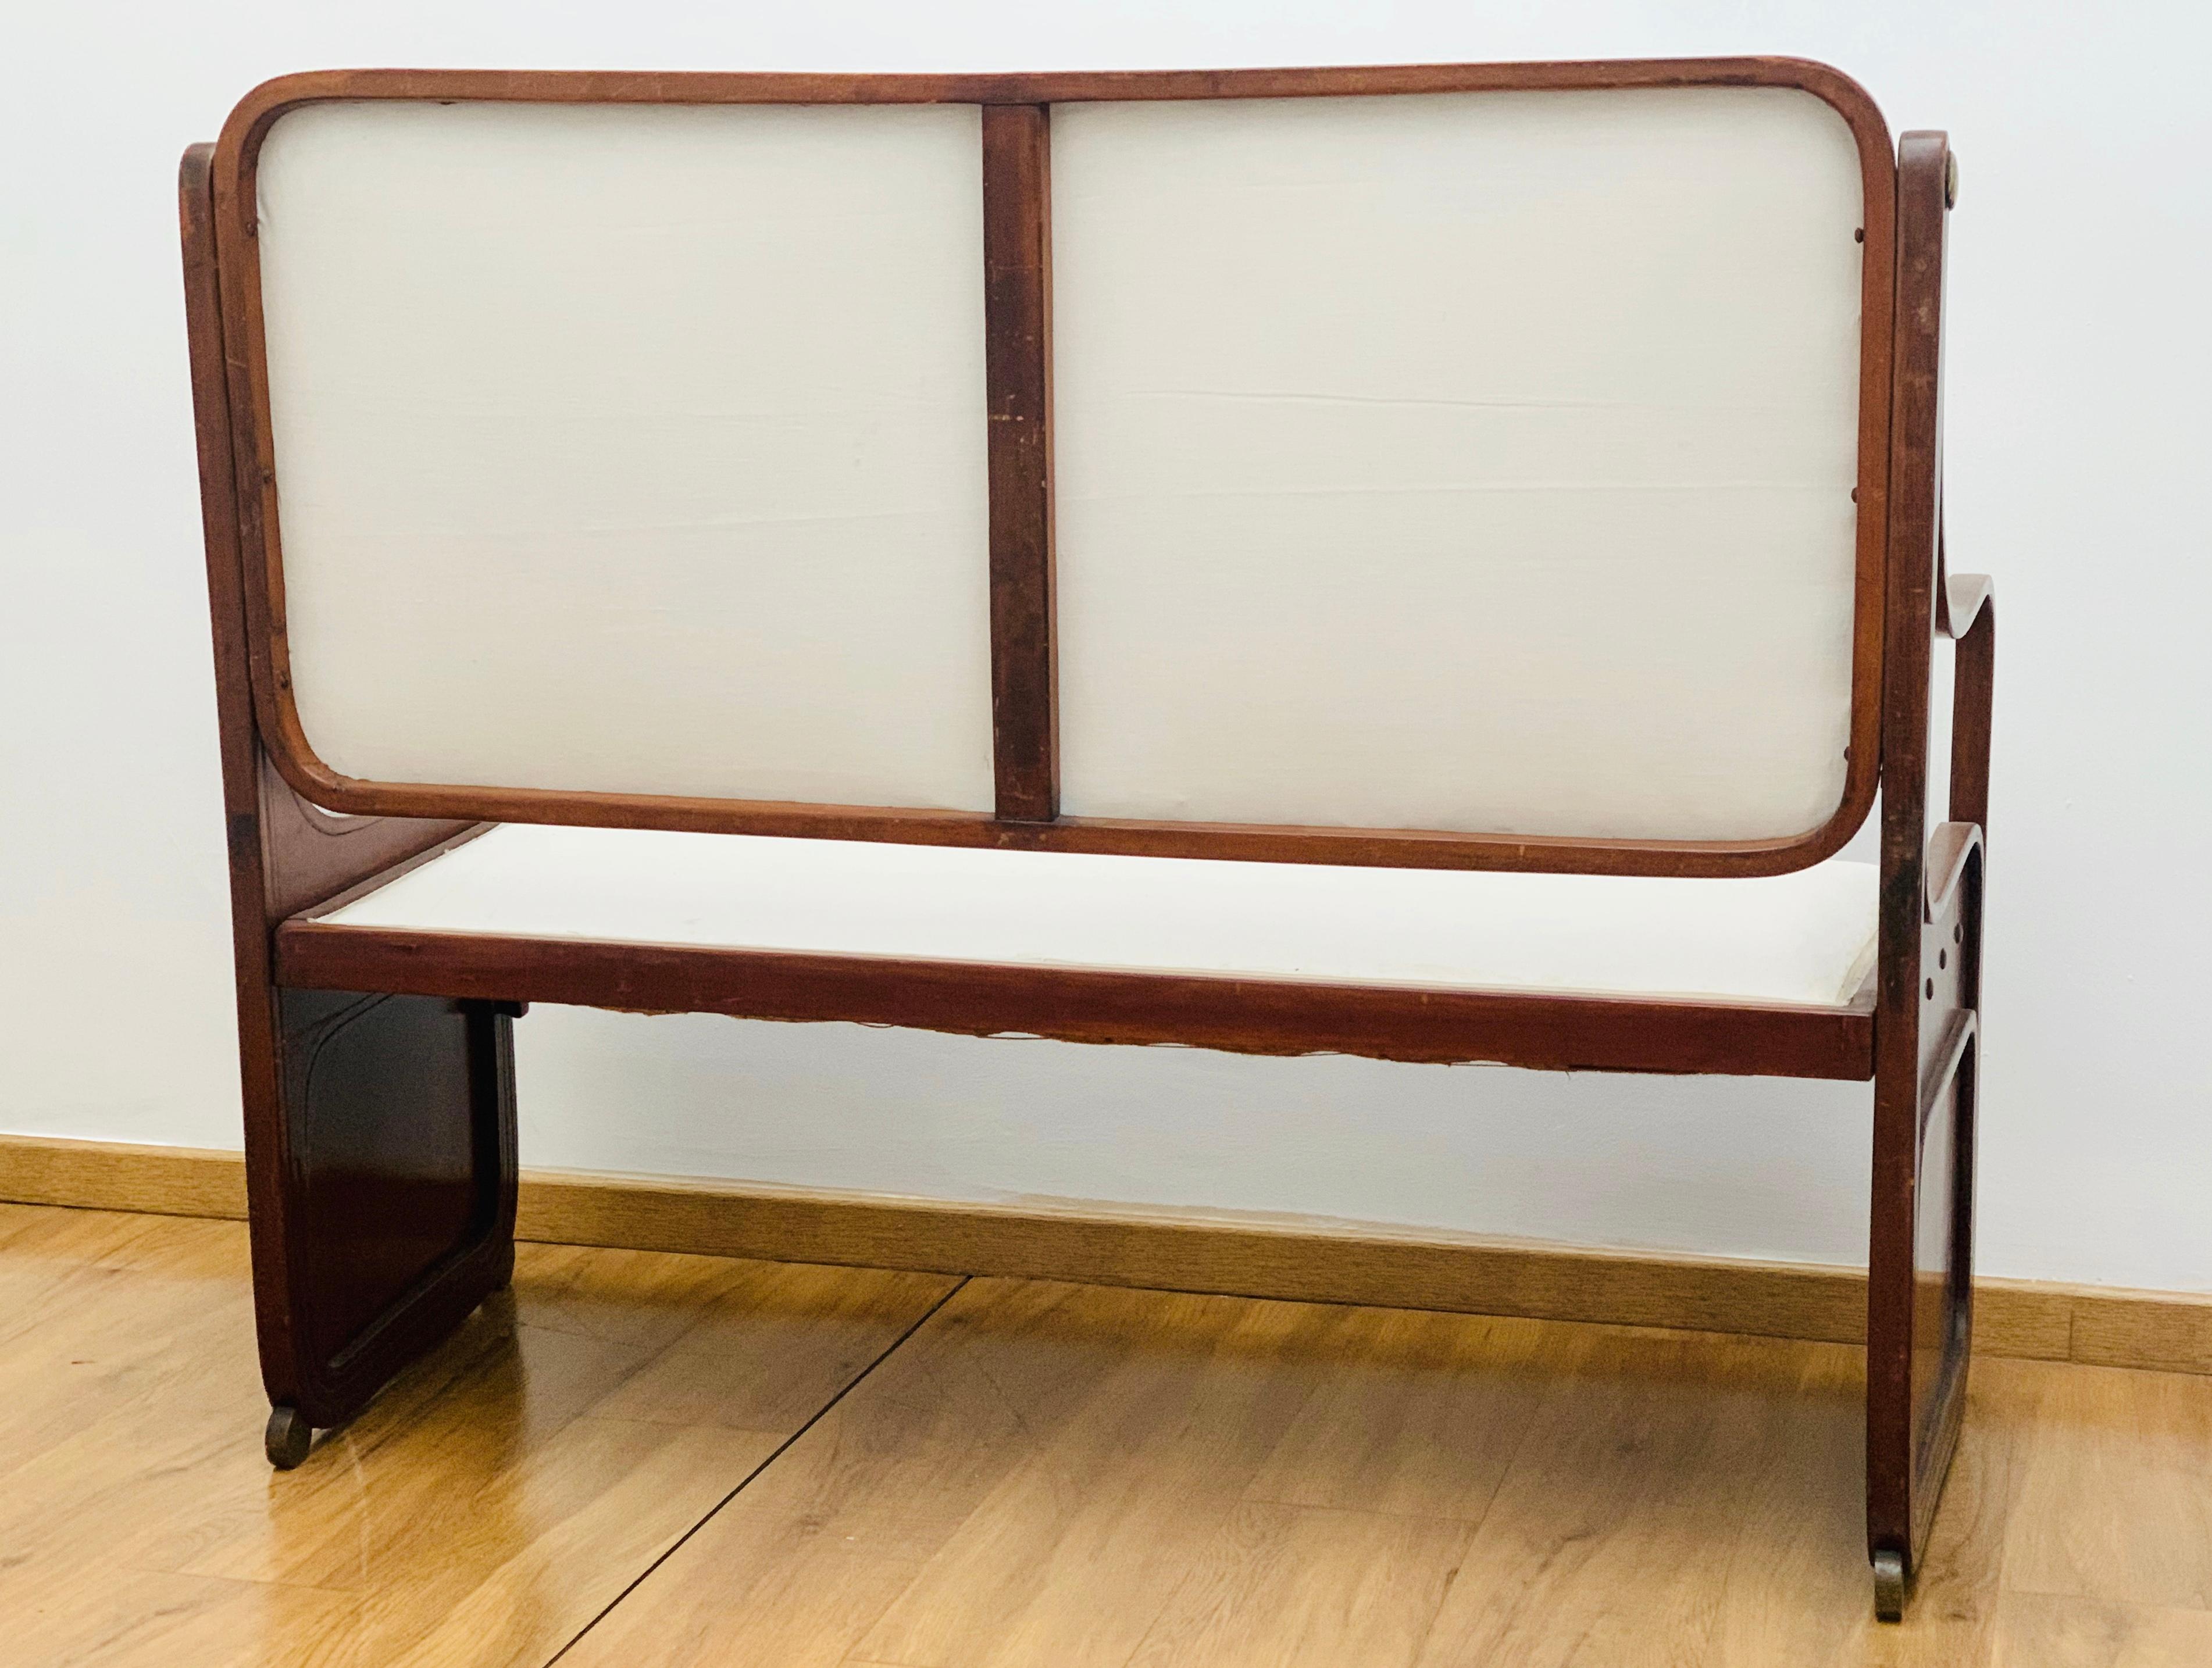 Austrian Bentwood Bench by Koloman Moser, Viennese Secession, circa 1900 For Sale